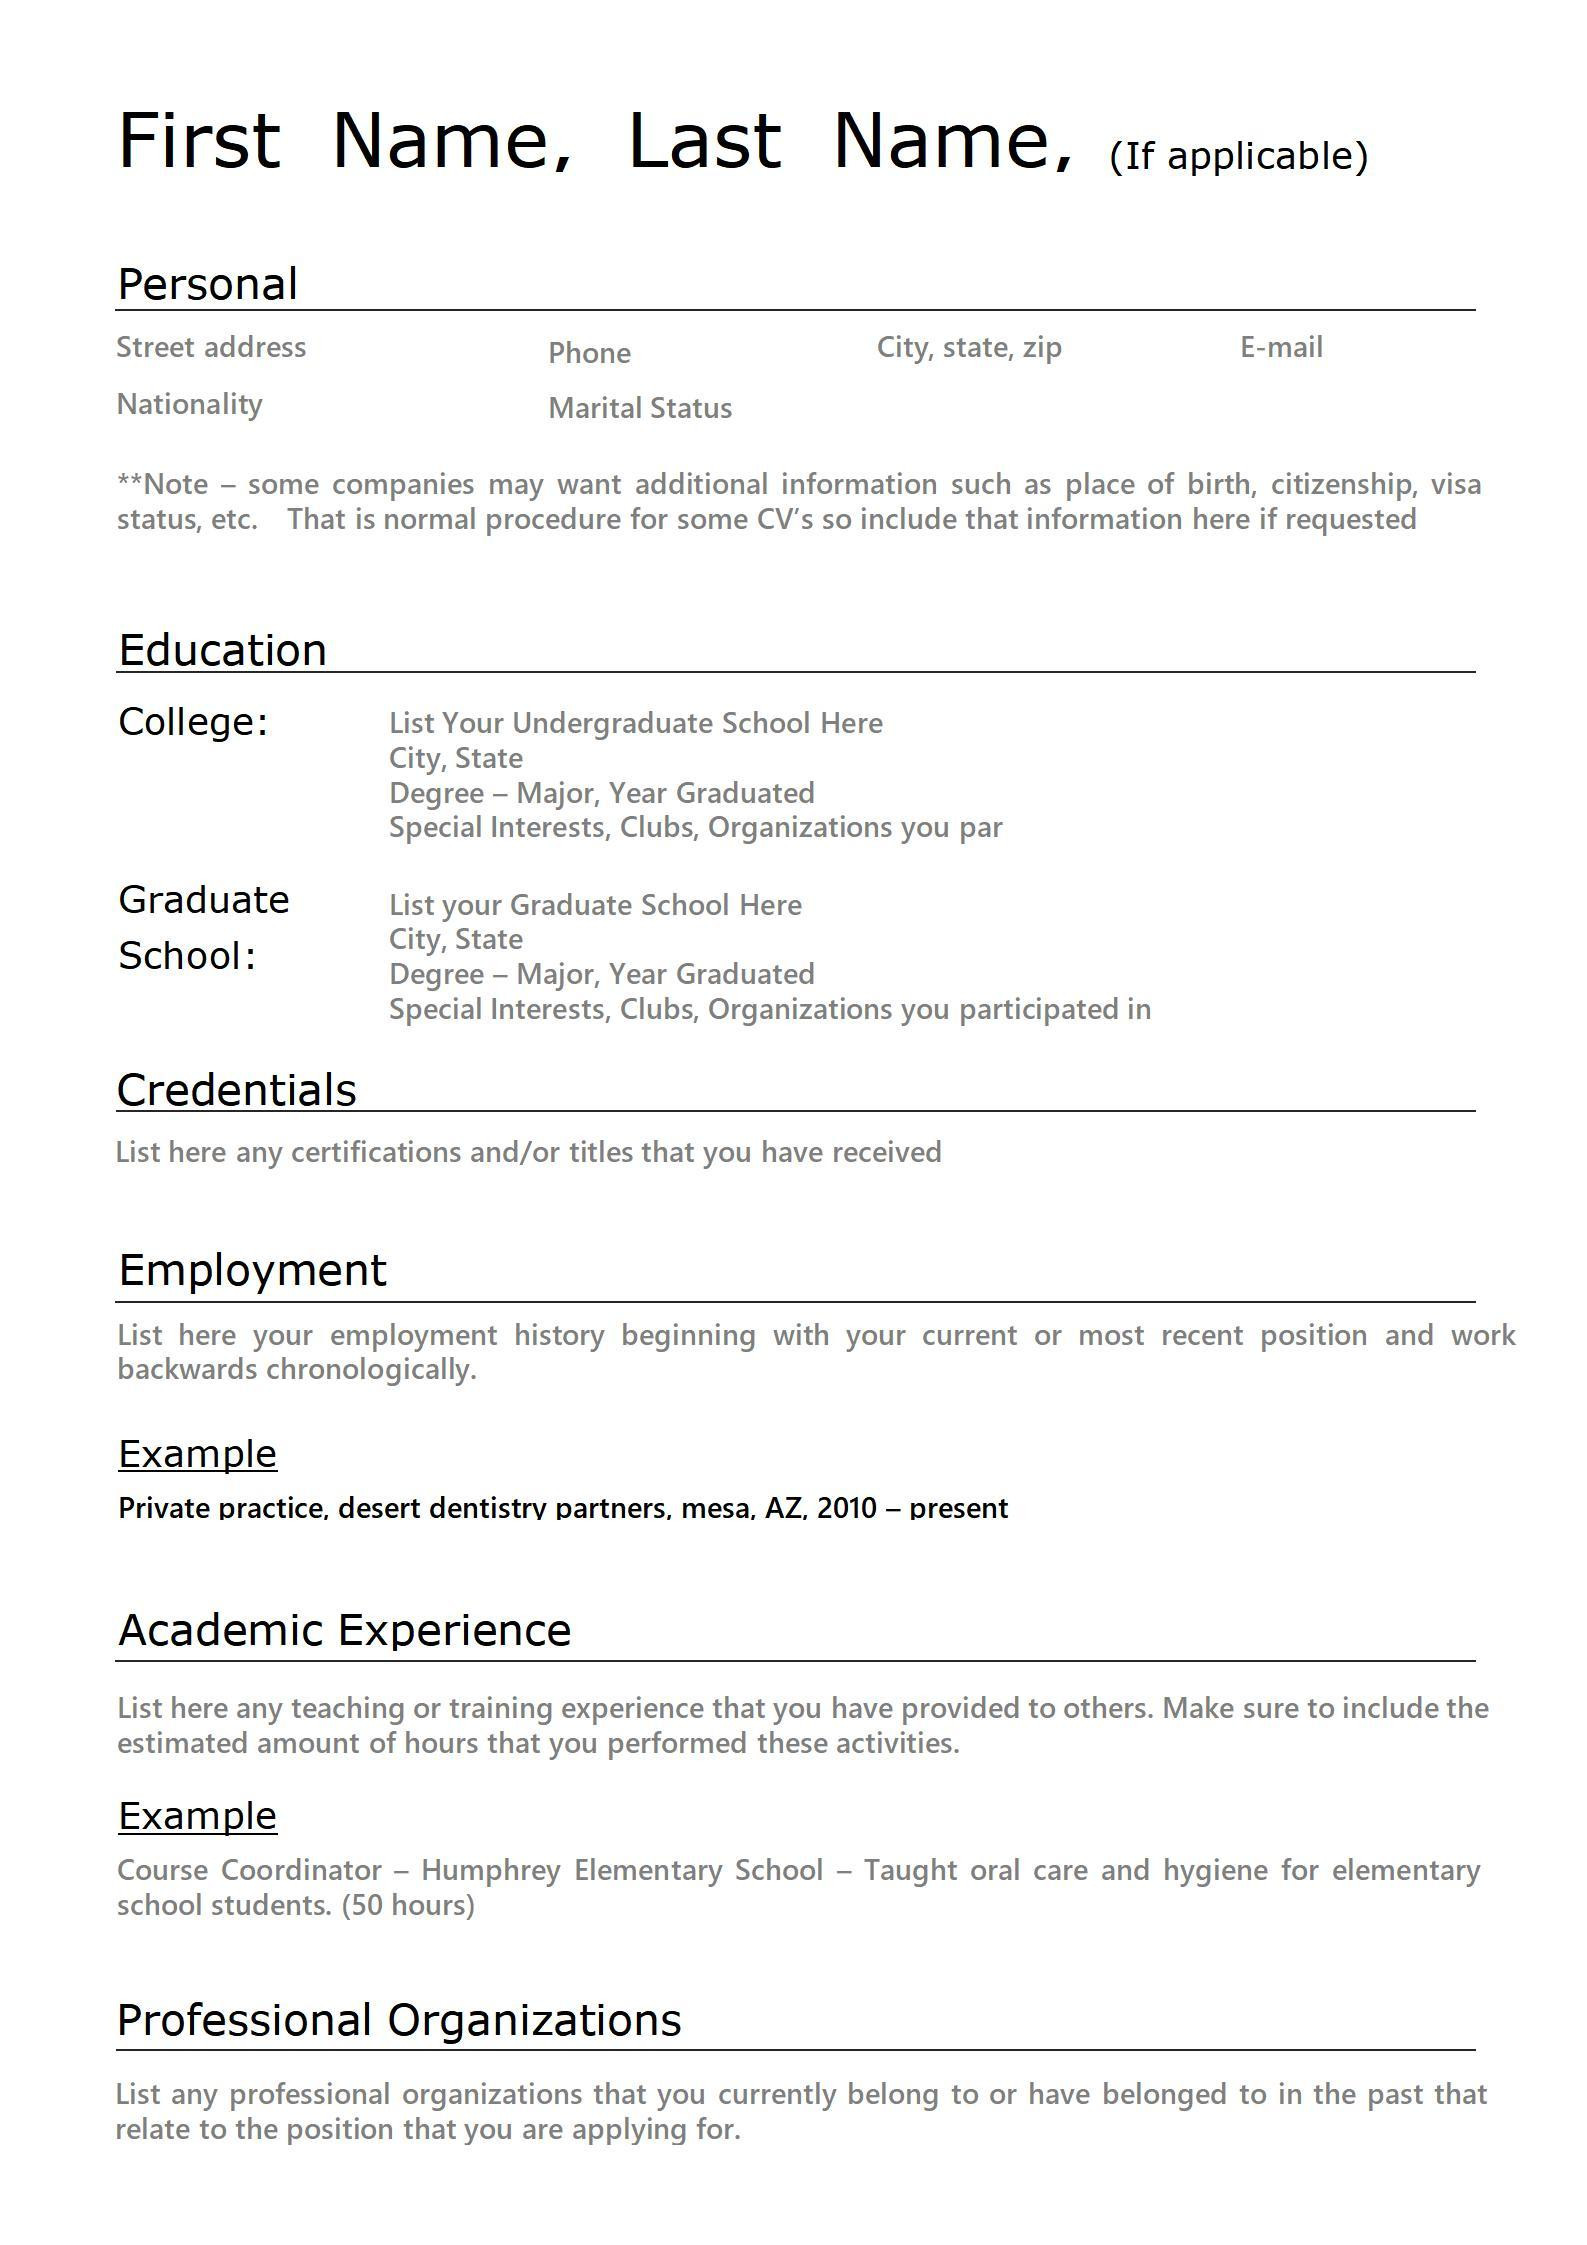 First Job Out Of College Resume Sample First-time Resume with No Experience Samples Wps Office Academy